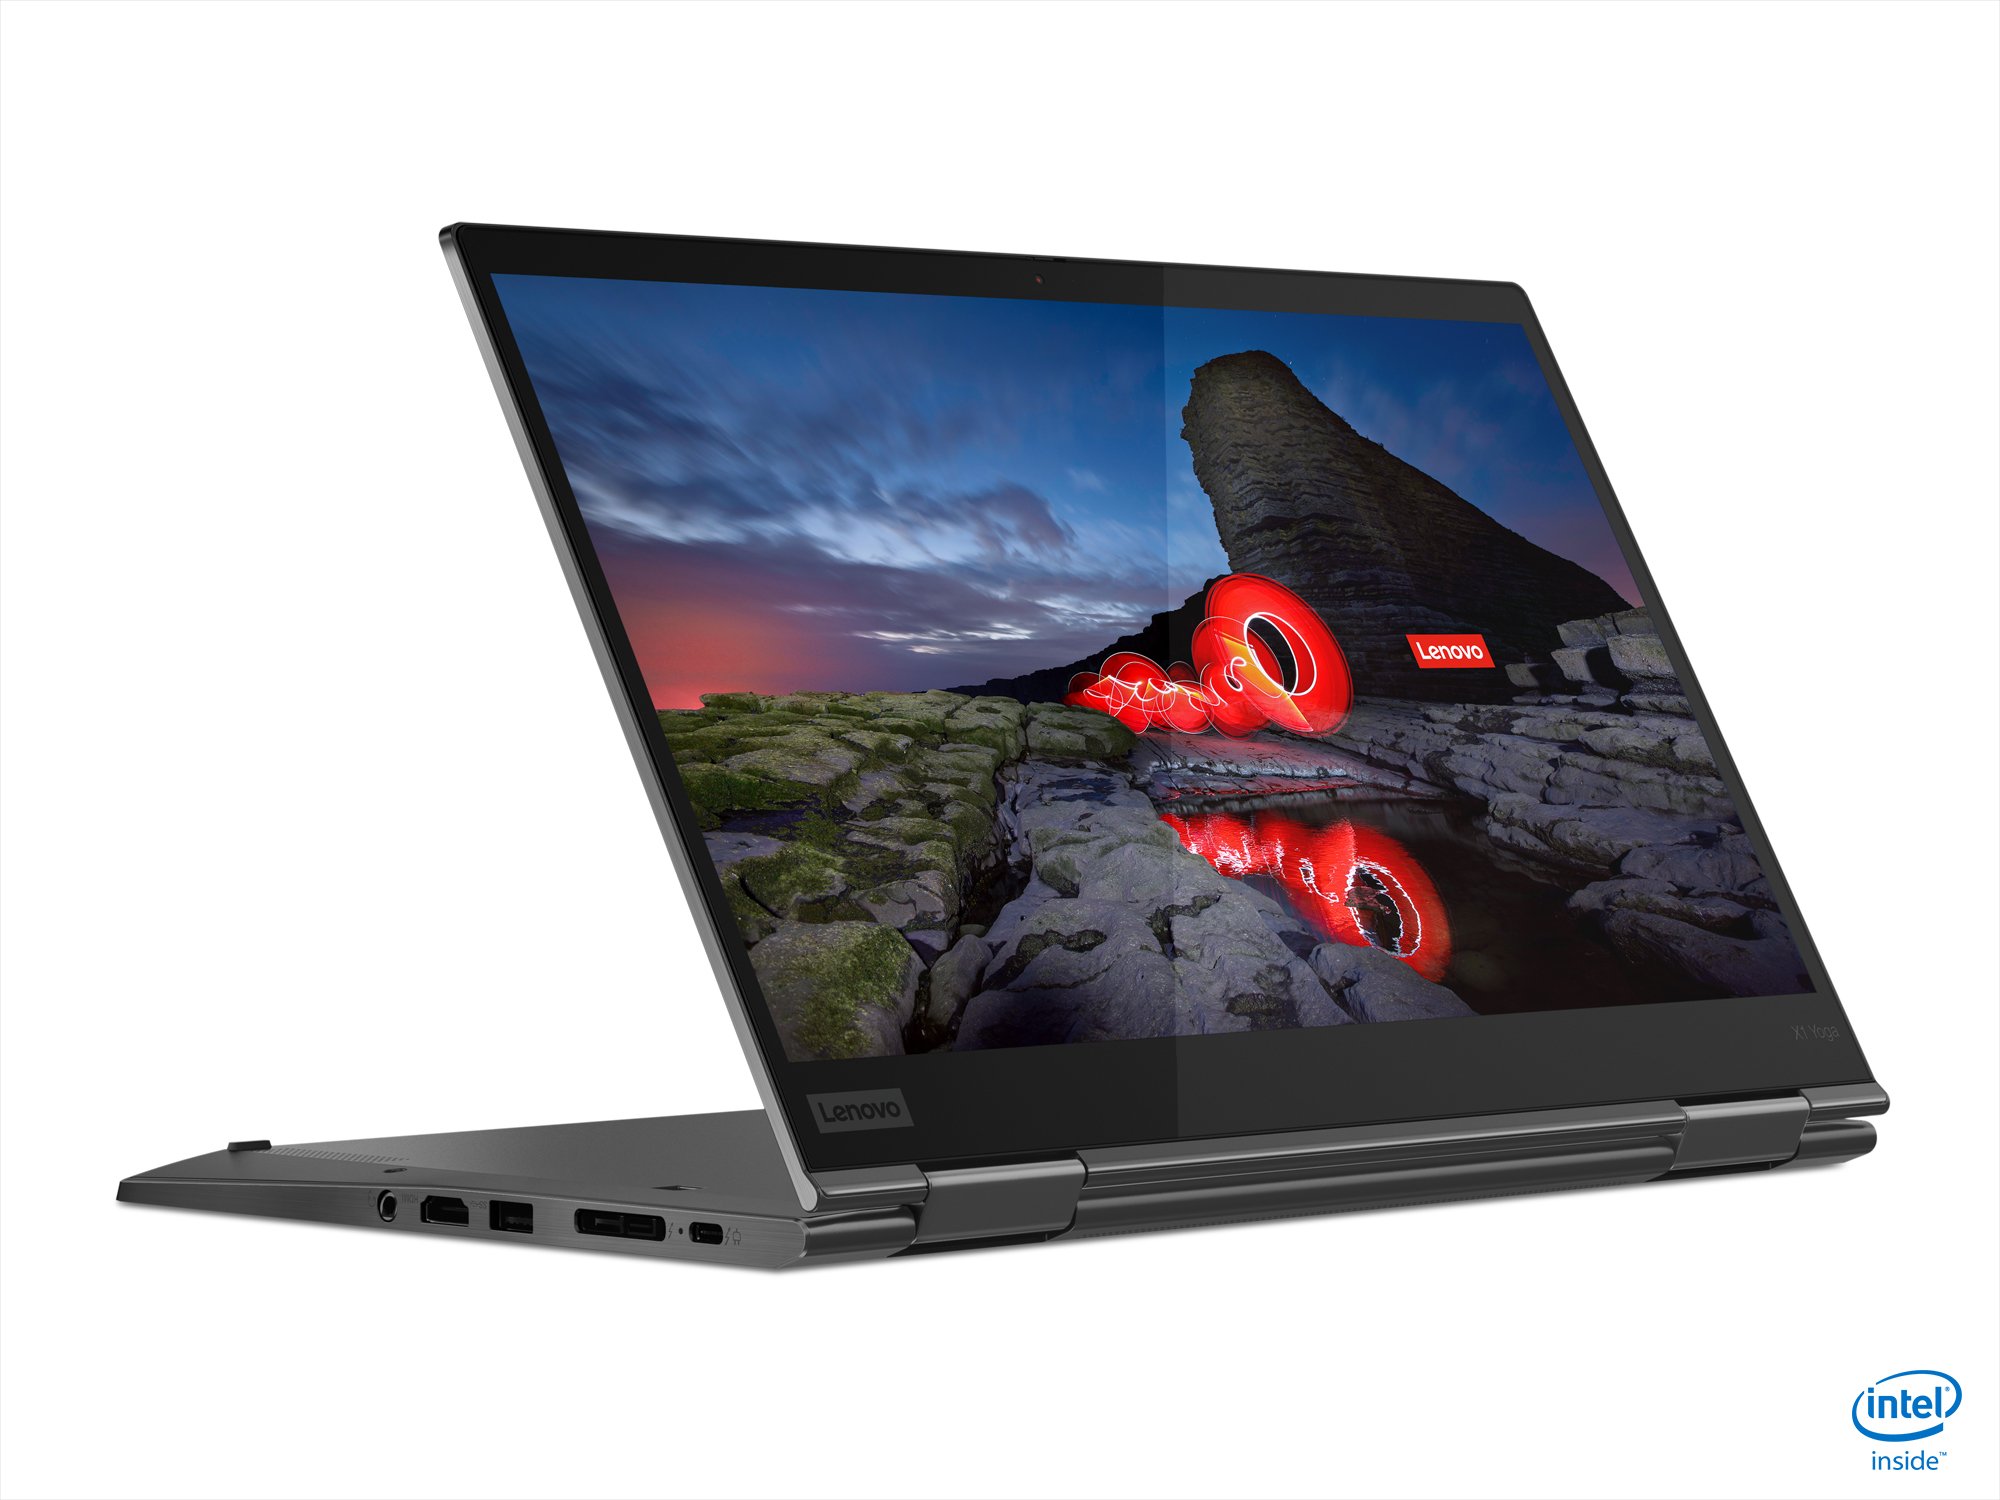 Big Lenovo Product Announcements Ahead Of CES 2020